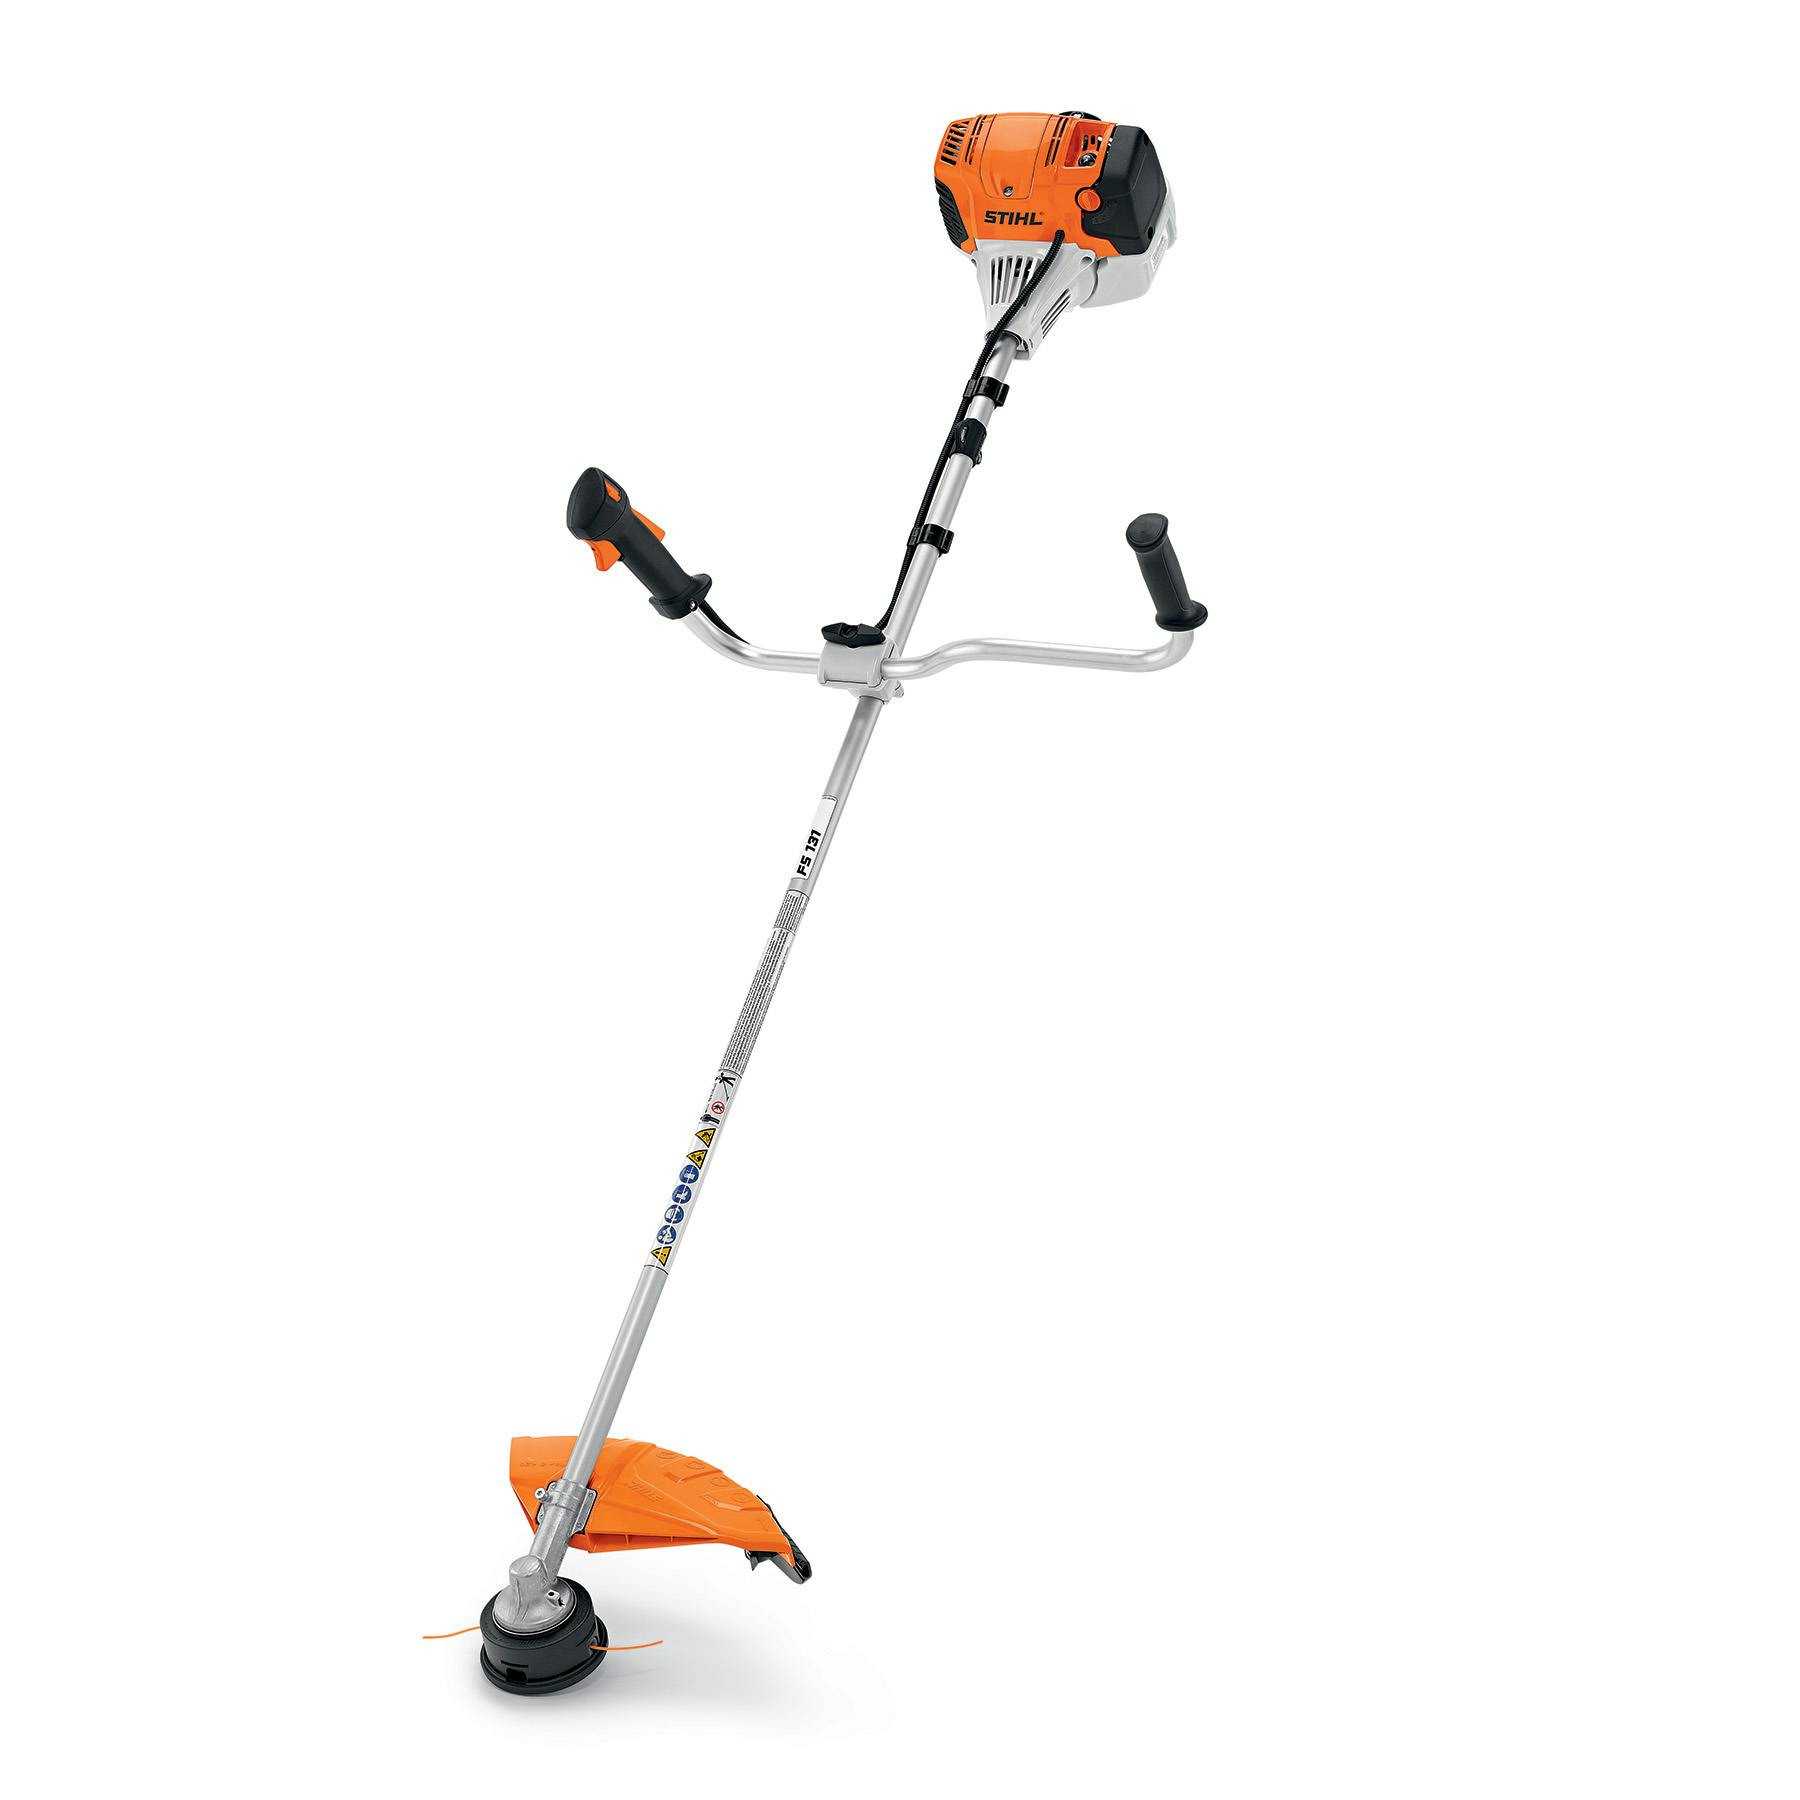 Buy online here Details about 5m of STIHL 4mm ROUND Brushcutter DR 